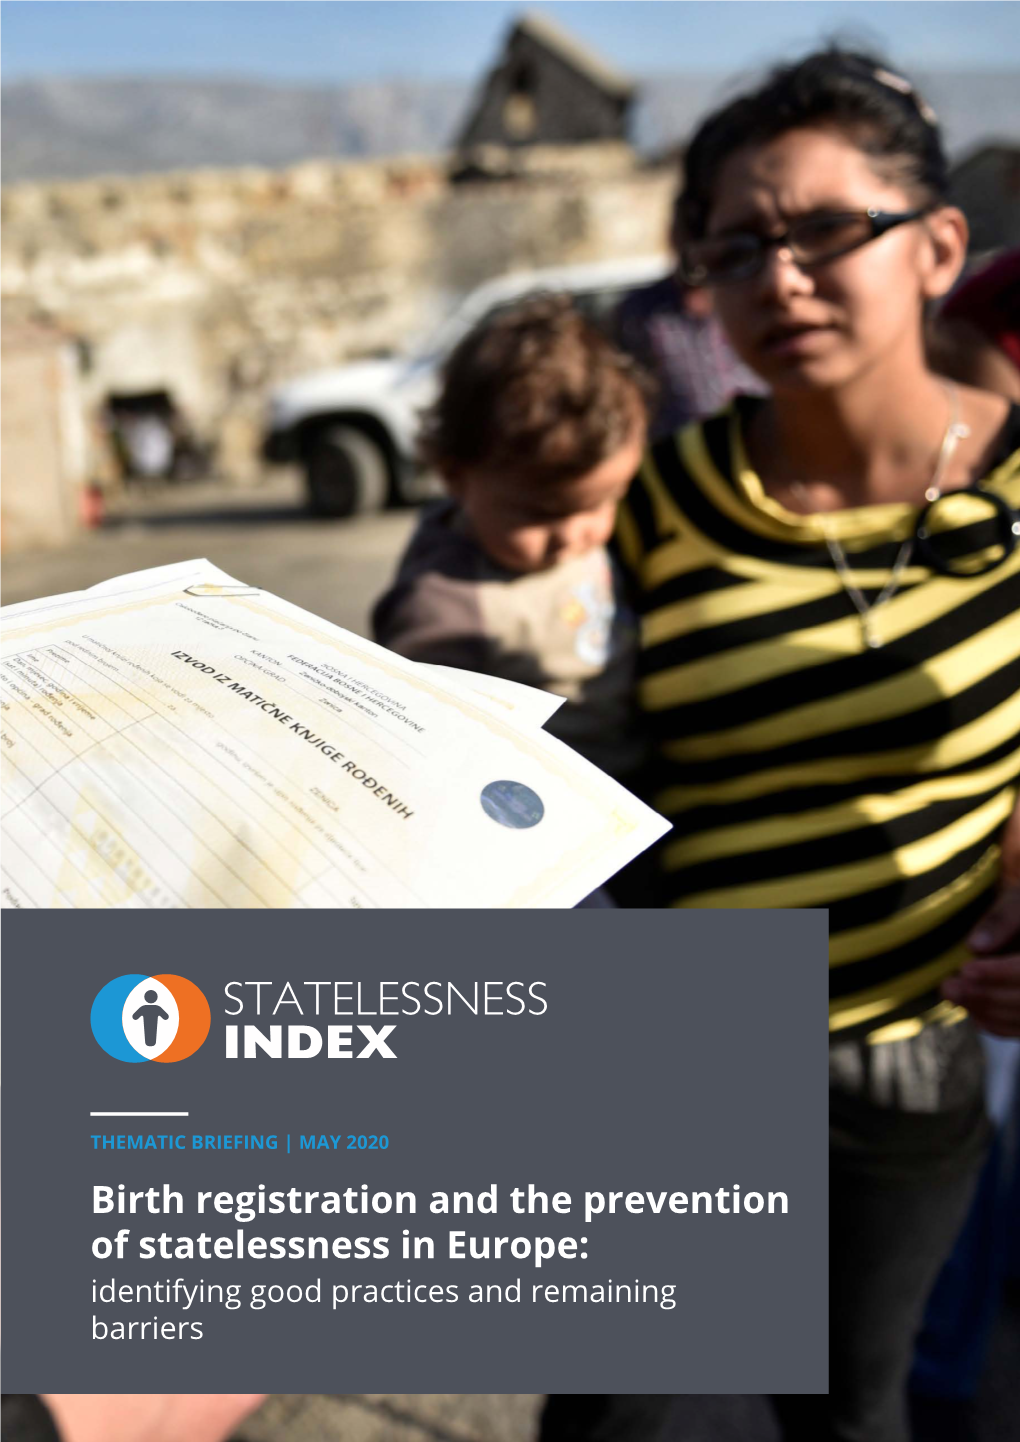 Birth Registration and the Prevention of Statelessness in Europe: Identifying Good Practices and Remaining Barriers the Statelessness Index